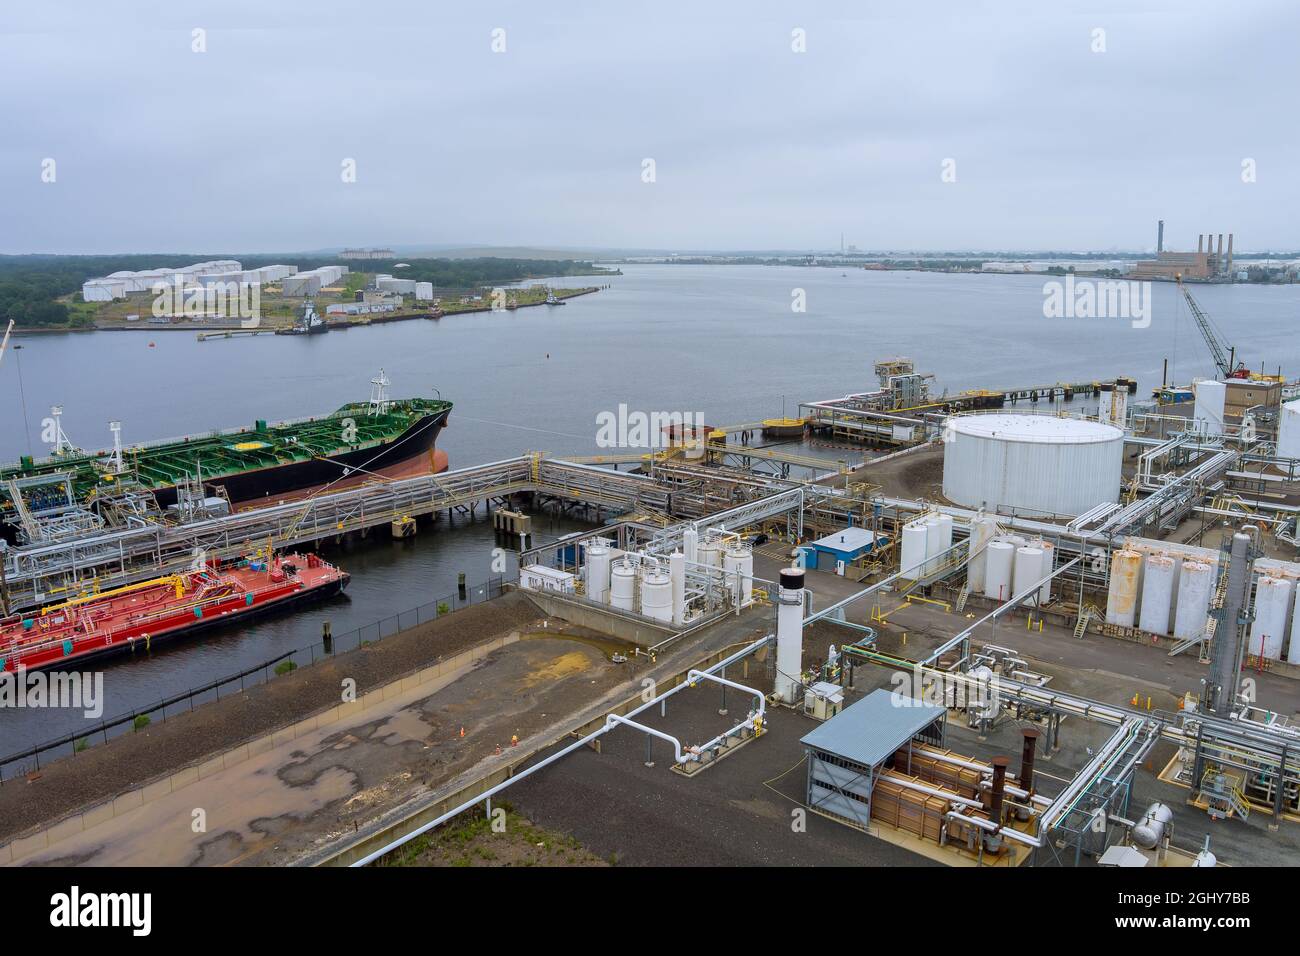 Aerial view tanker ship unloading in port of logistic import export business Stock Photo